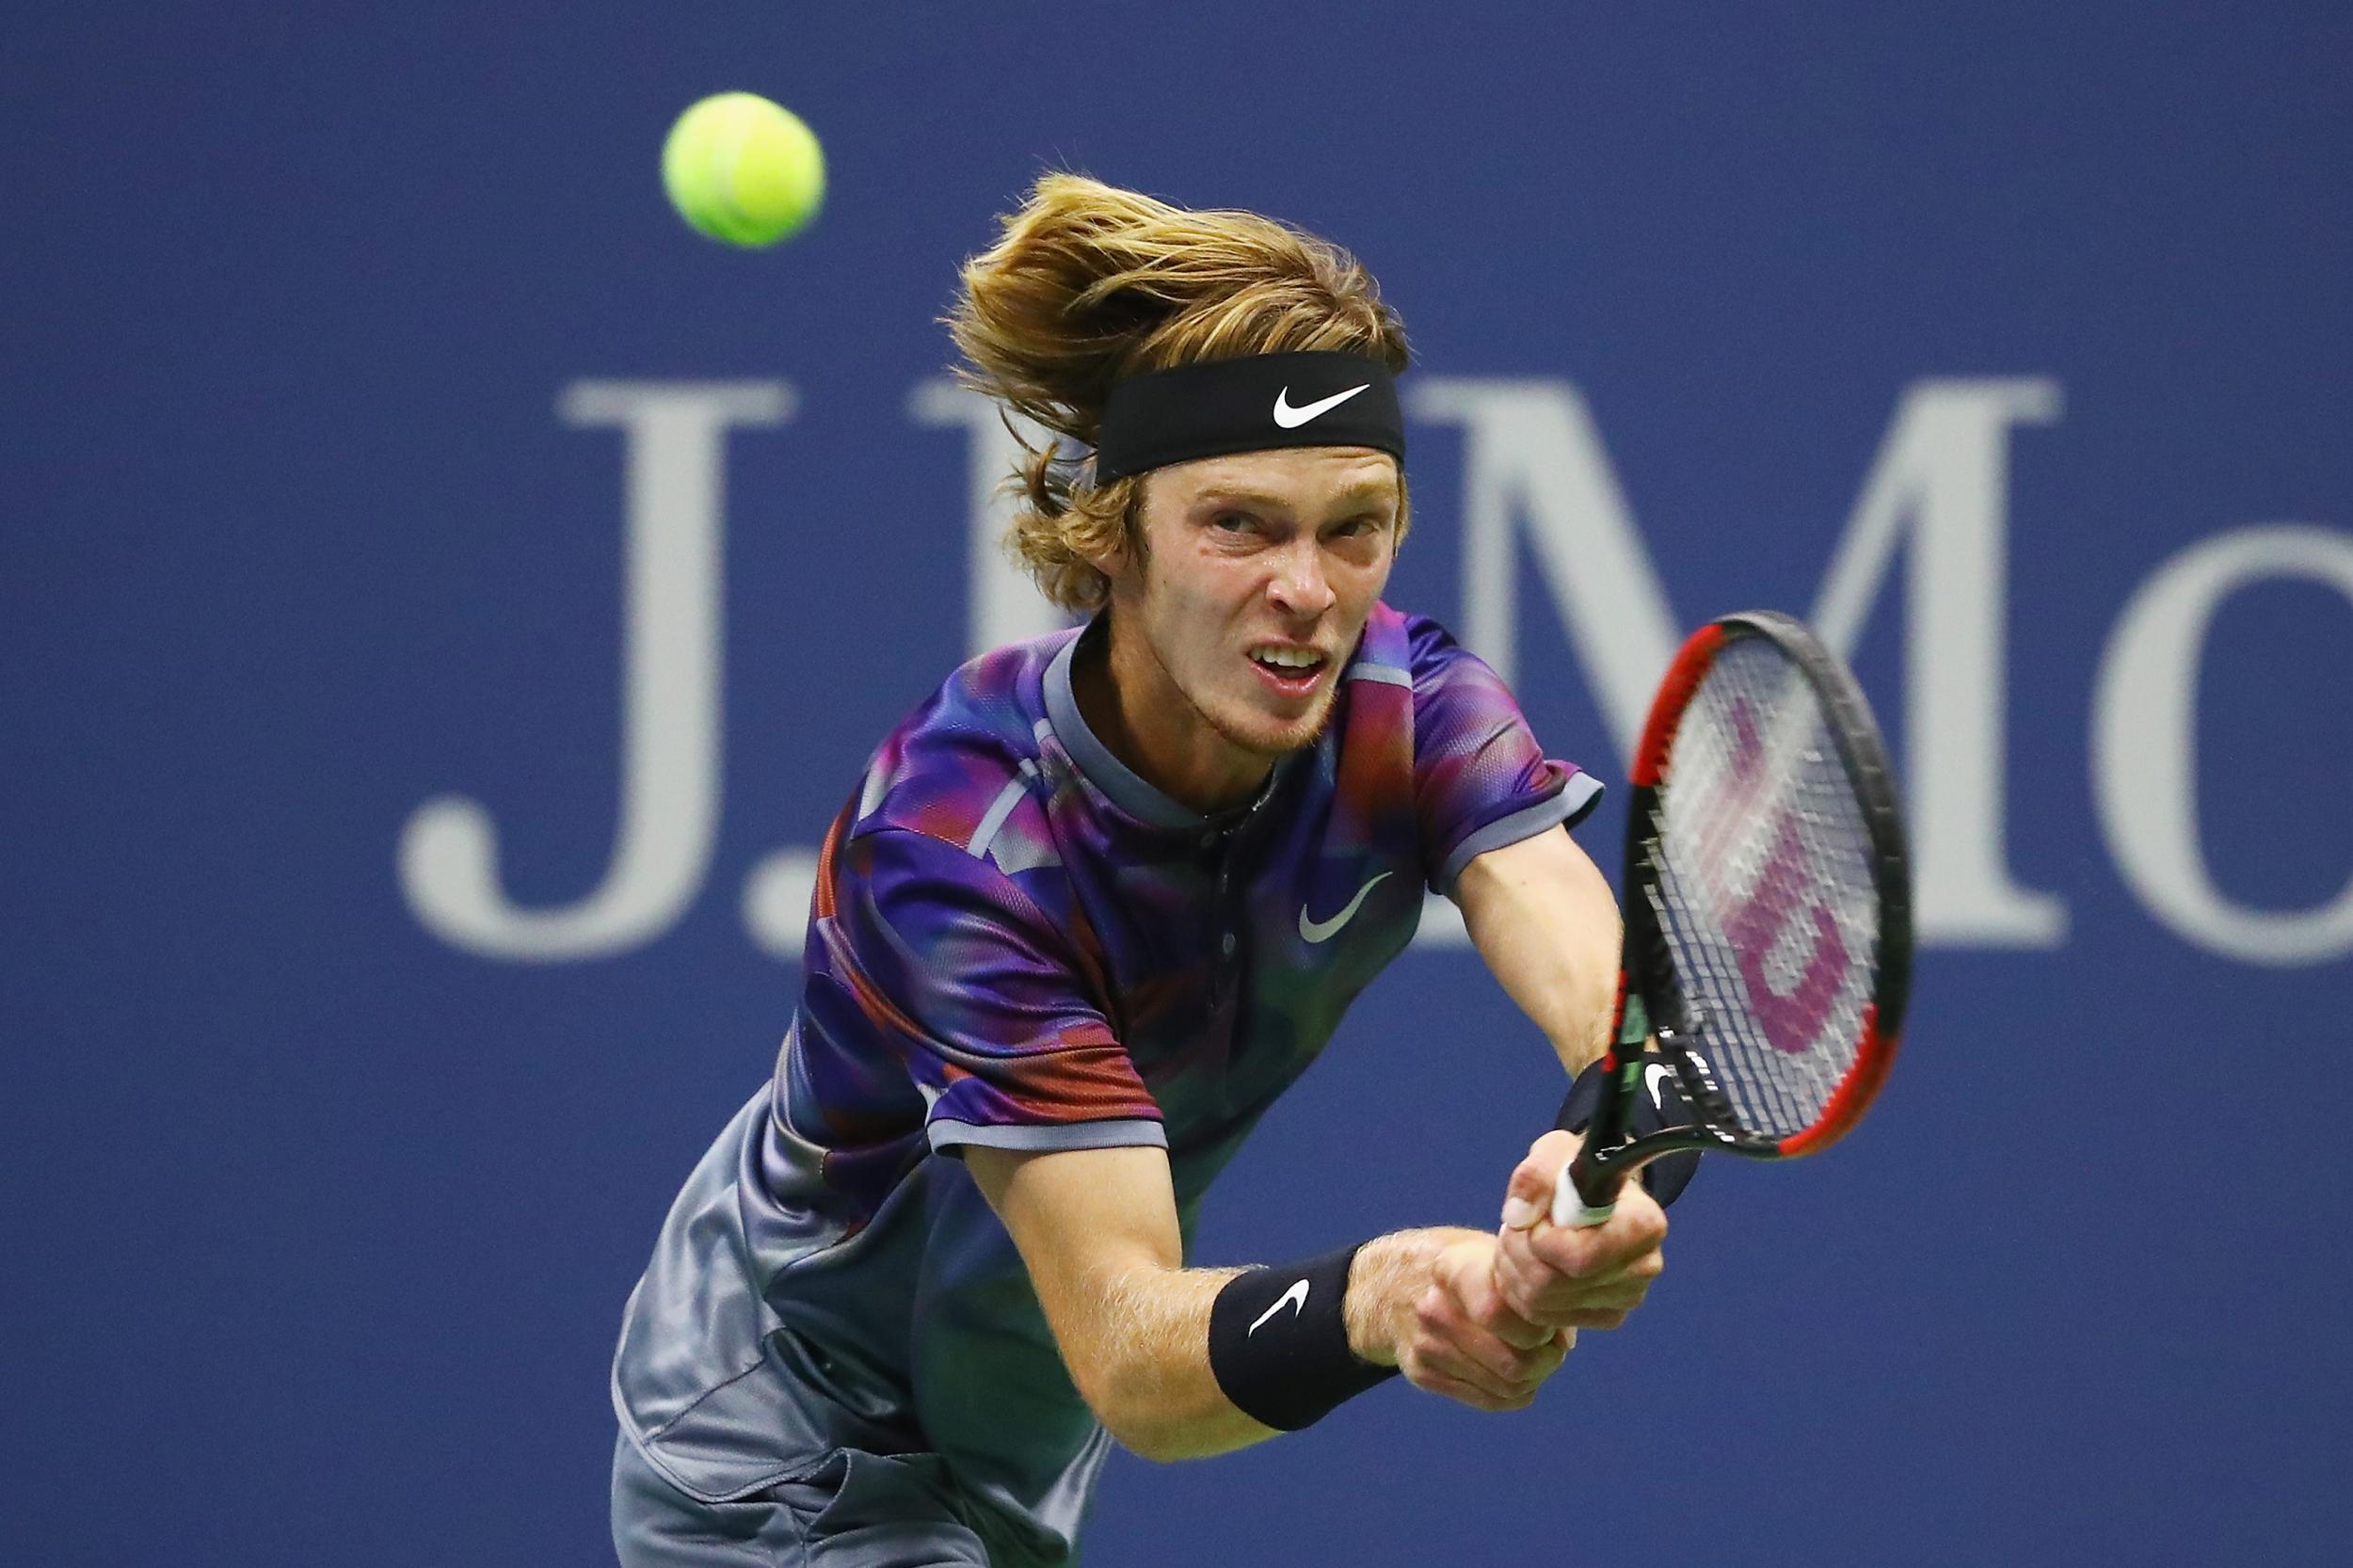 &#13;
Rublev was unable to threaten the Spaniard &#13;